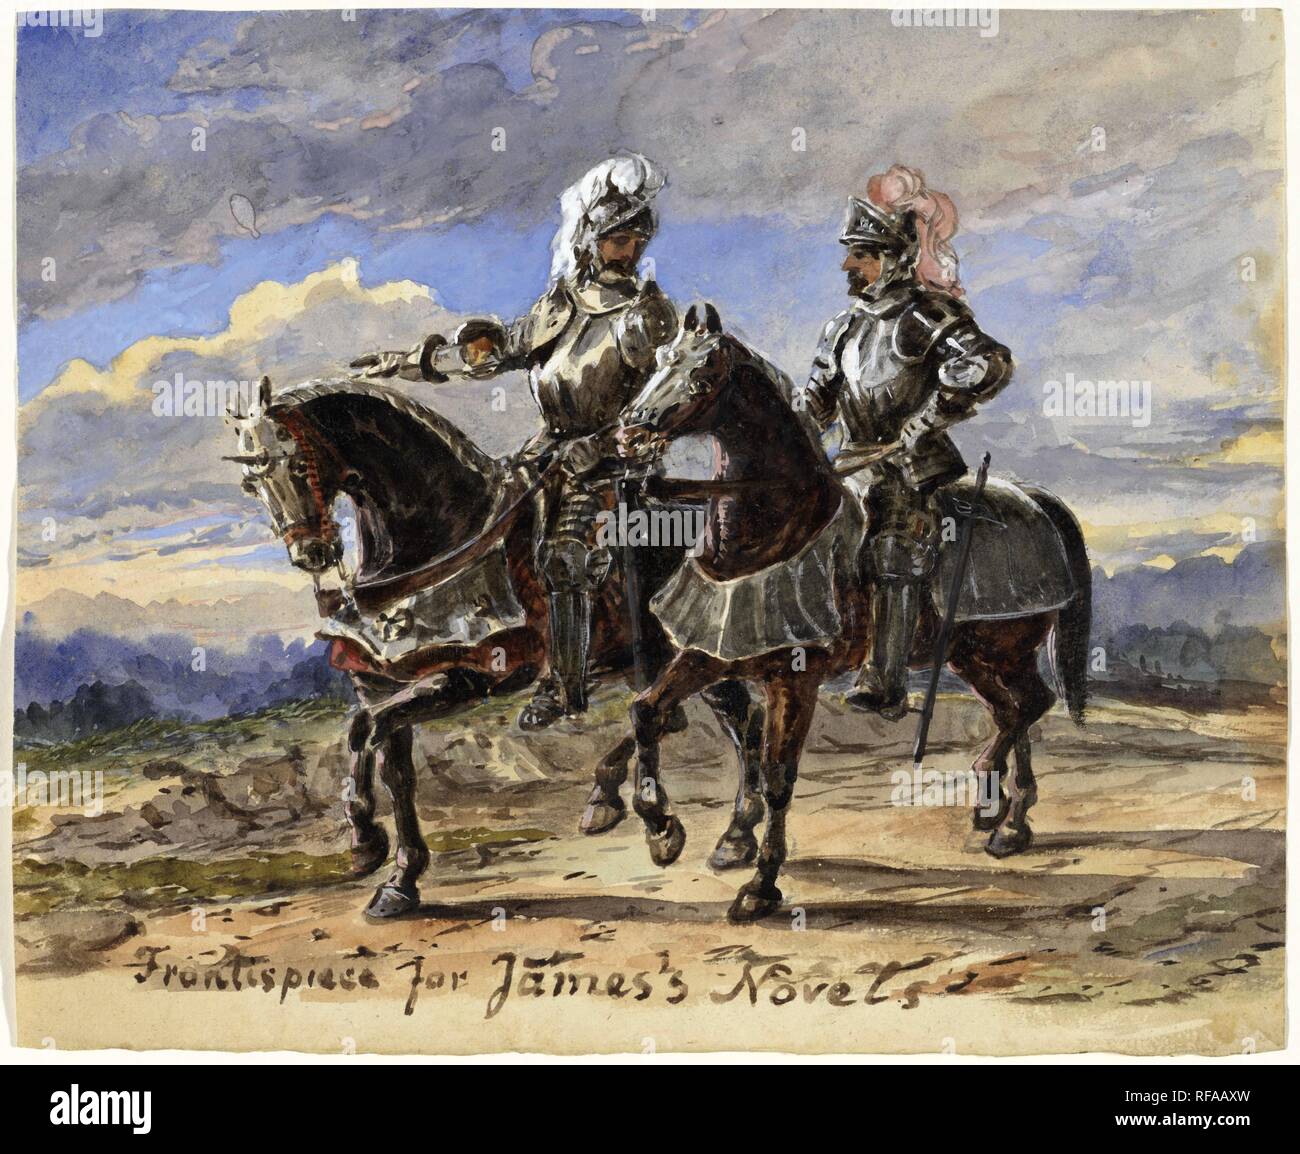 Two knights in armor on horseback fighting a duel with lances in a